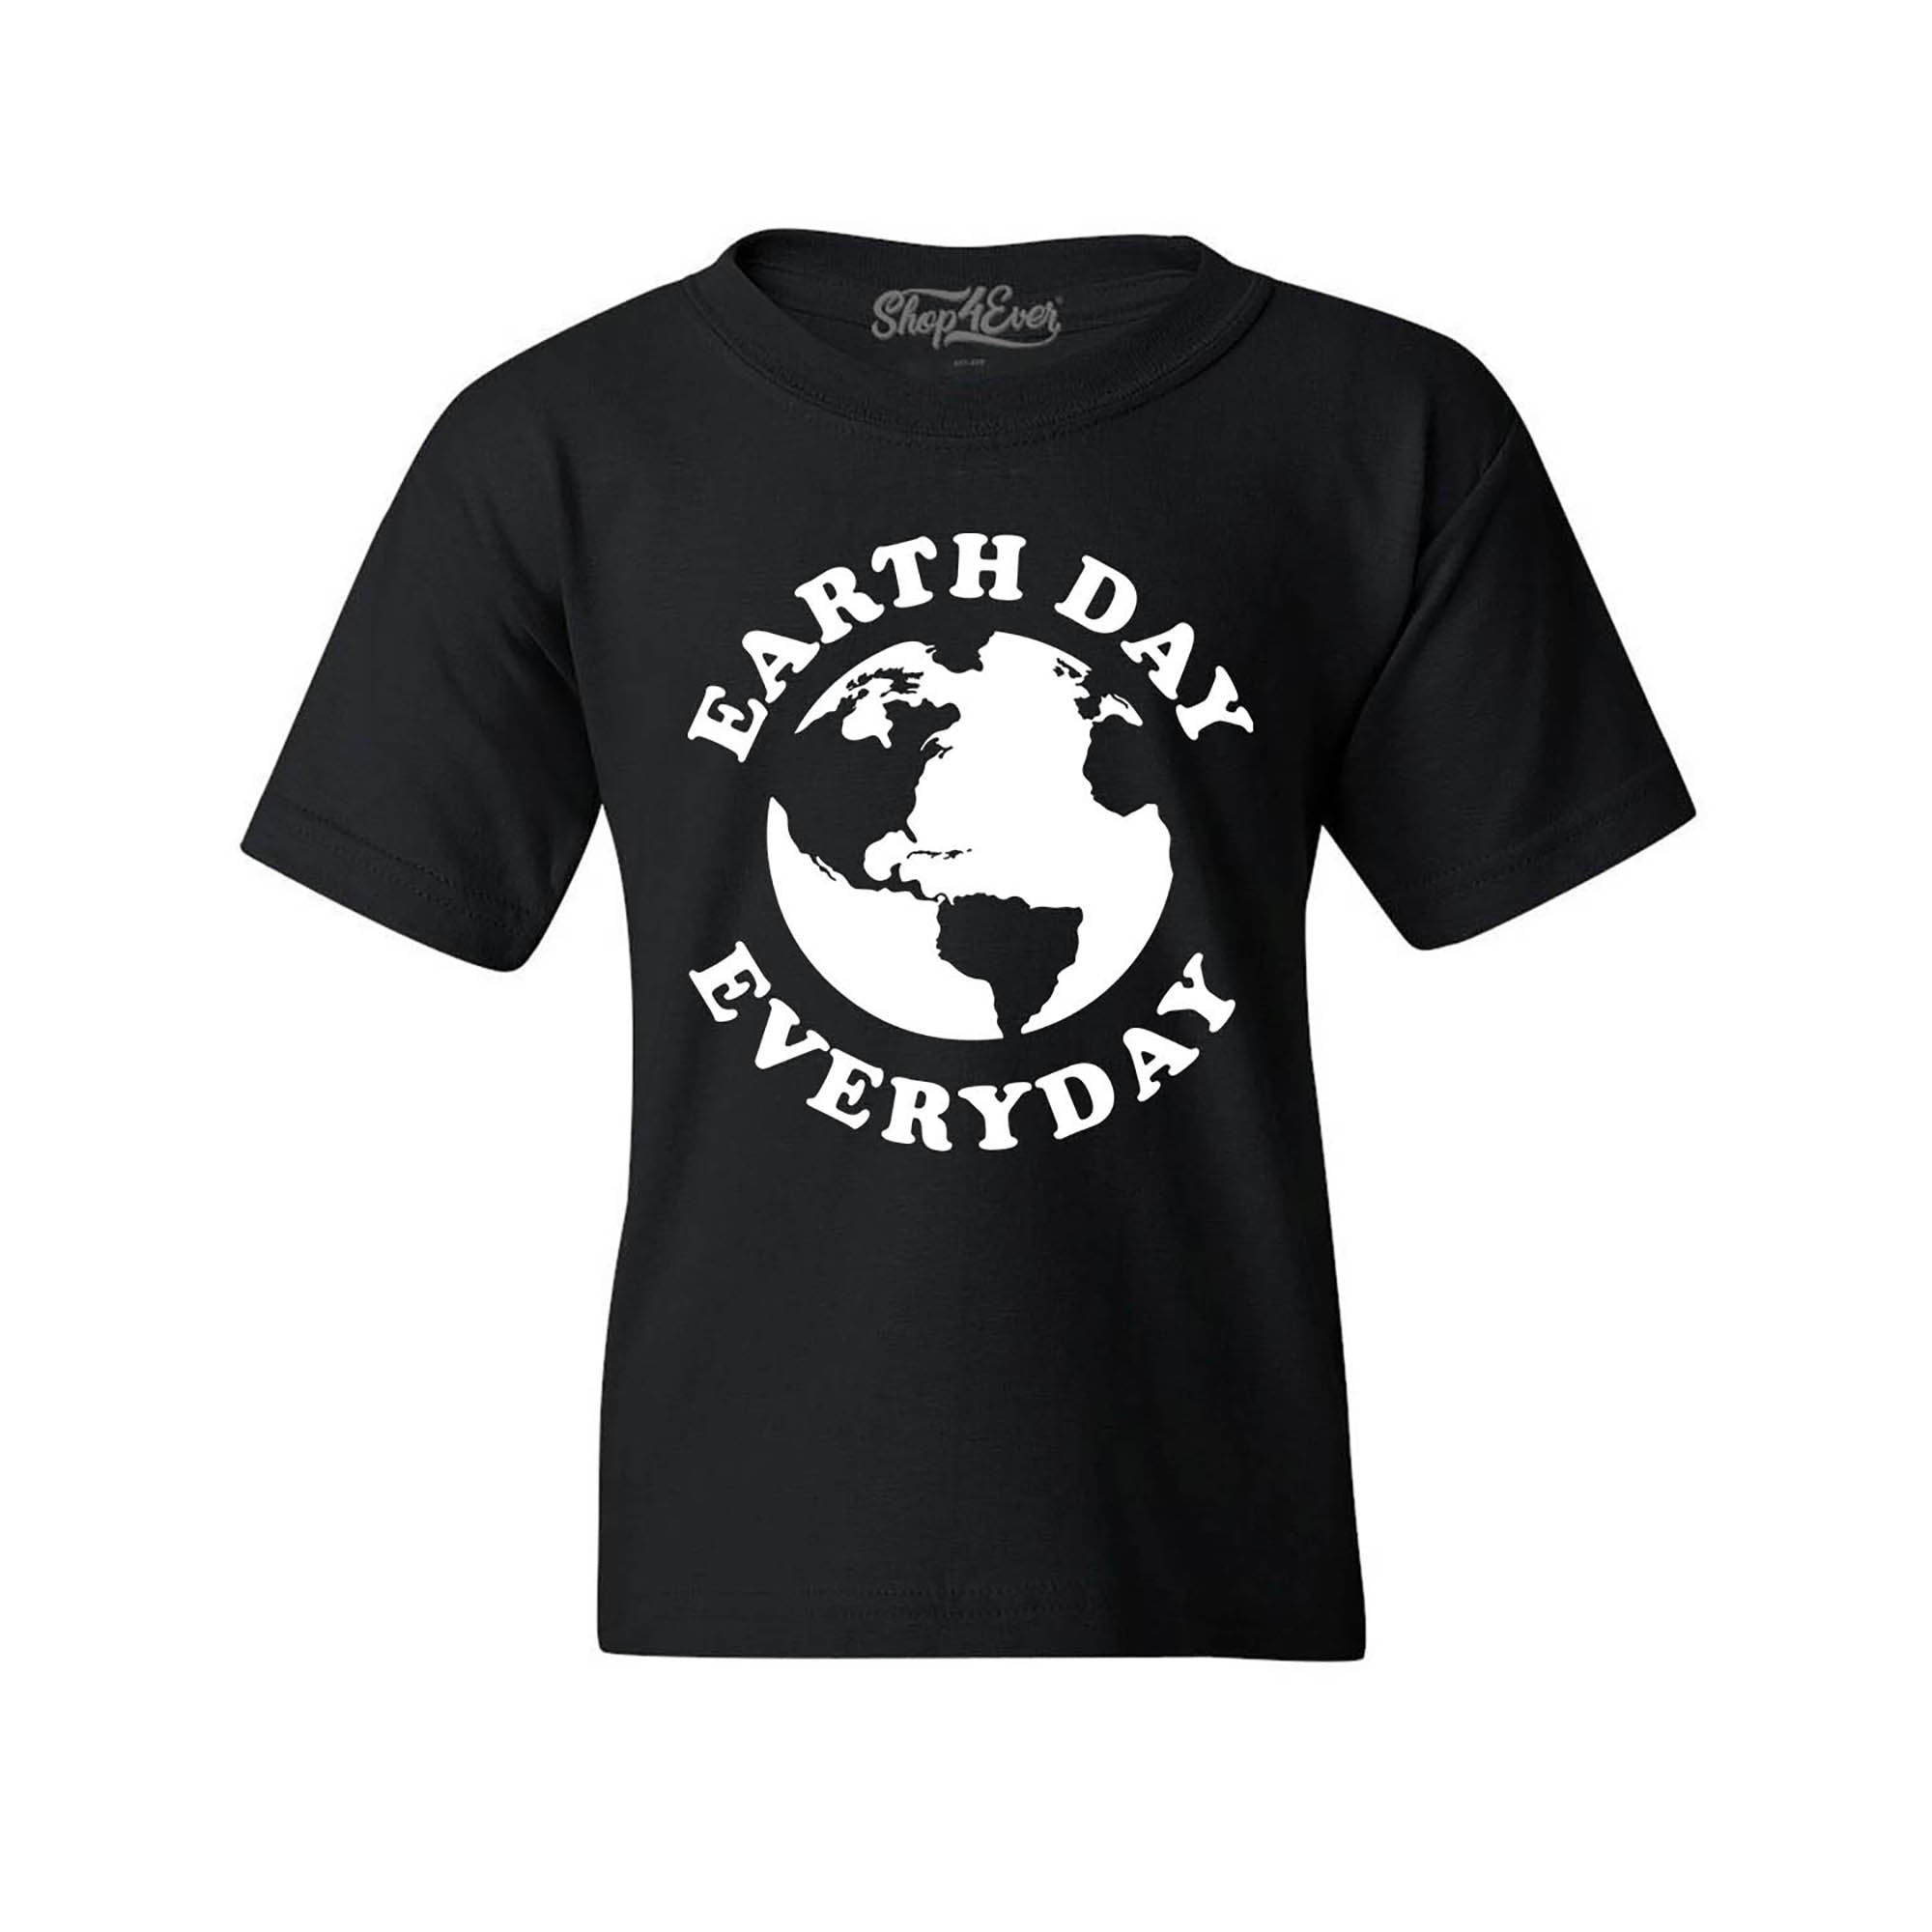 Earth Day Everyday Kids Child Tee Environmental Youth's T-Shirt